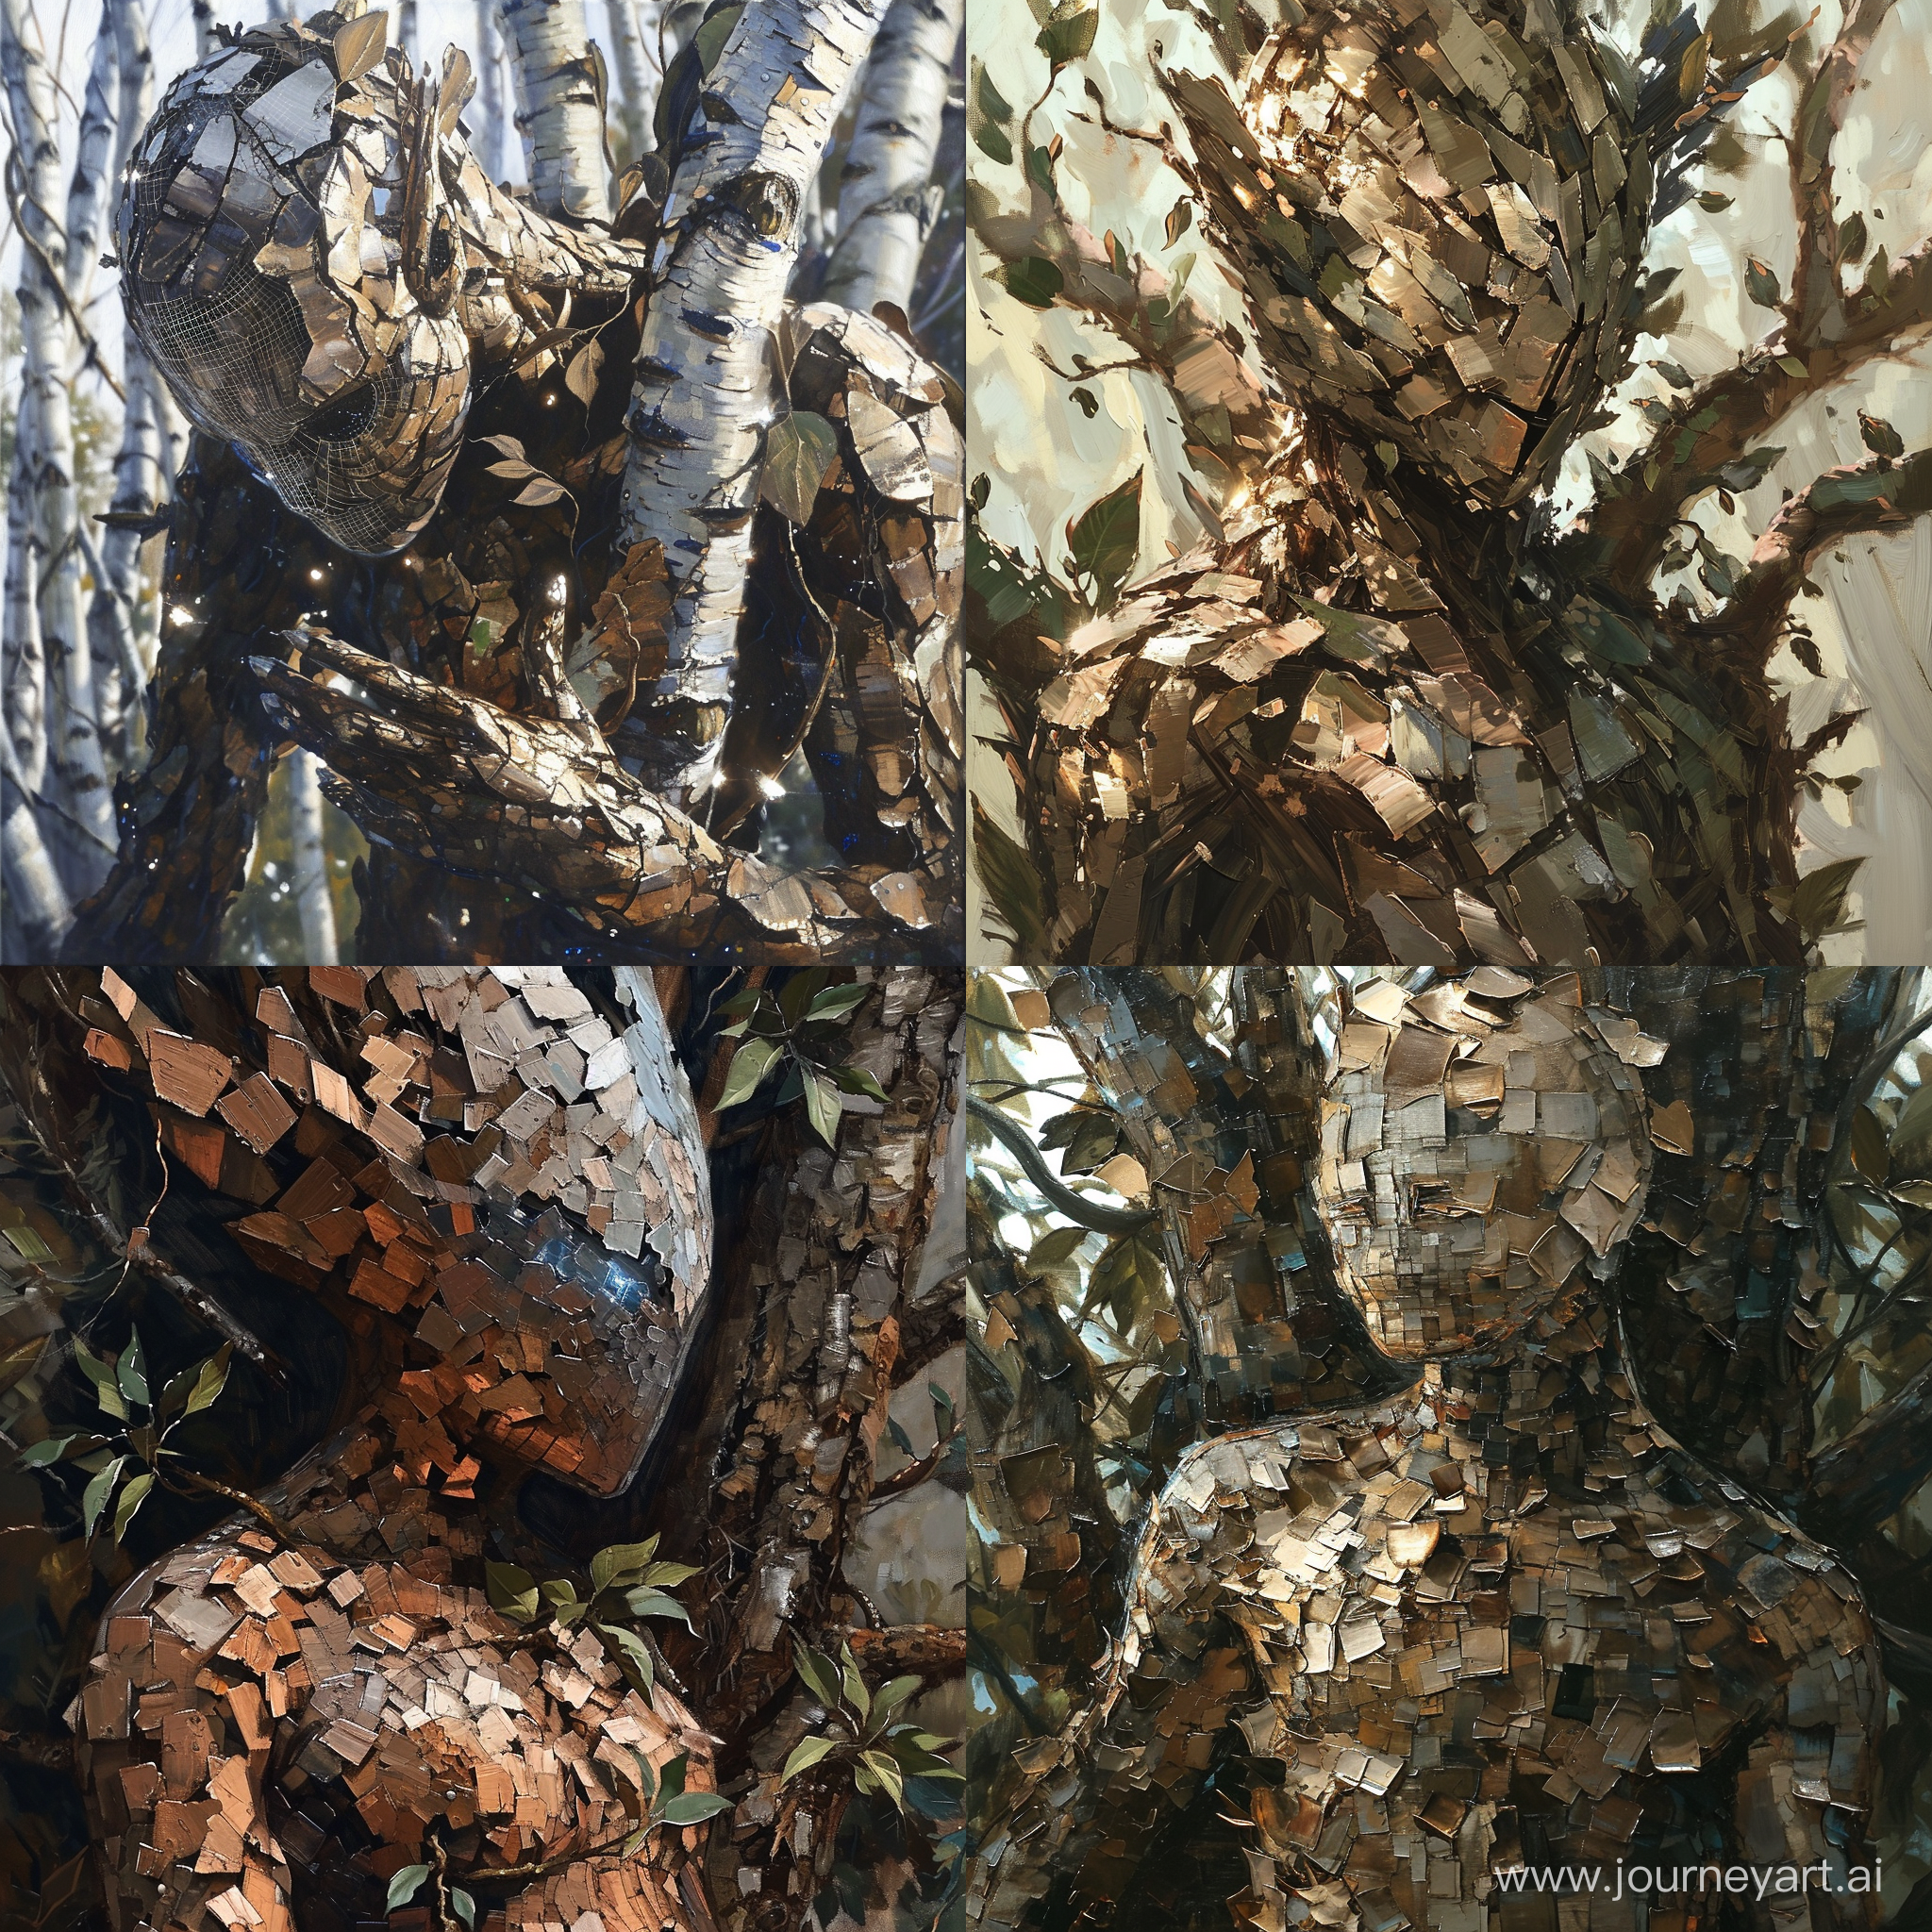 A glitchy dryad, an ornamental creature with a mix of organic and digital elements, is portrayed in an oil painting. The image showcases a stunningly detailed composition, with intricate brushwork that brings the subject to life. The dryad's body appears distorted, as if affected by a digital glitch, with pixelated bark merging seamlessly with shimmering metallic leaves. The juxtaposition of the glitch and the traditional oil painting technique creates a mesmerizing effect. This high-quality image captivates viewers, inviting them to delve into the collision of nature and technology in this surreal depiction of a digital forest.